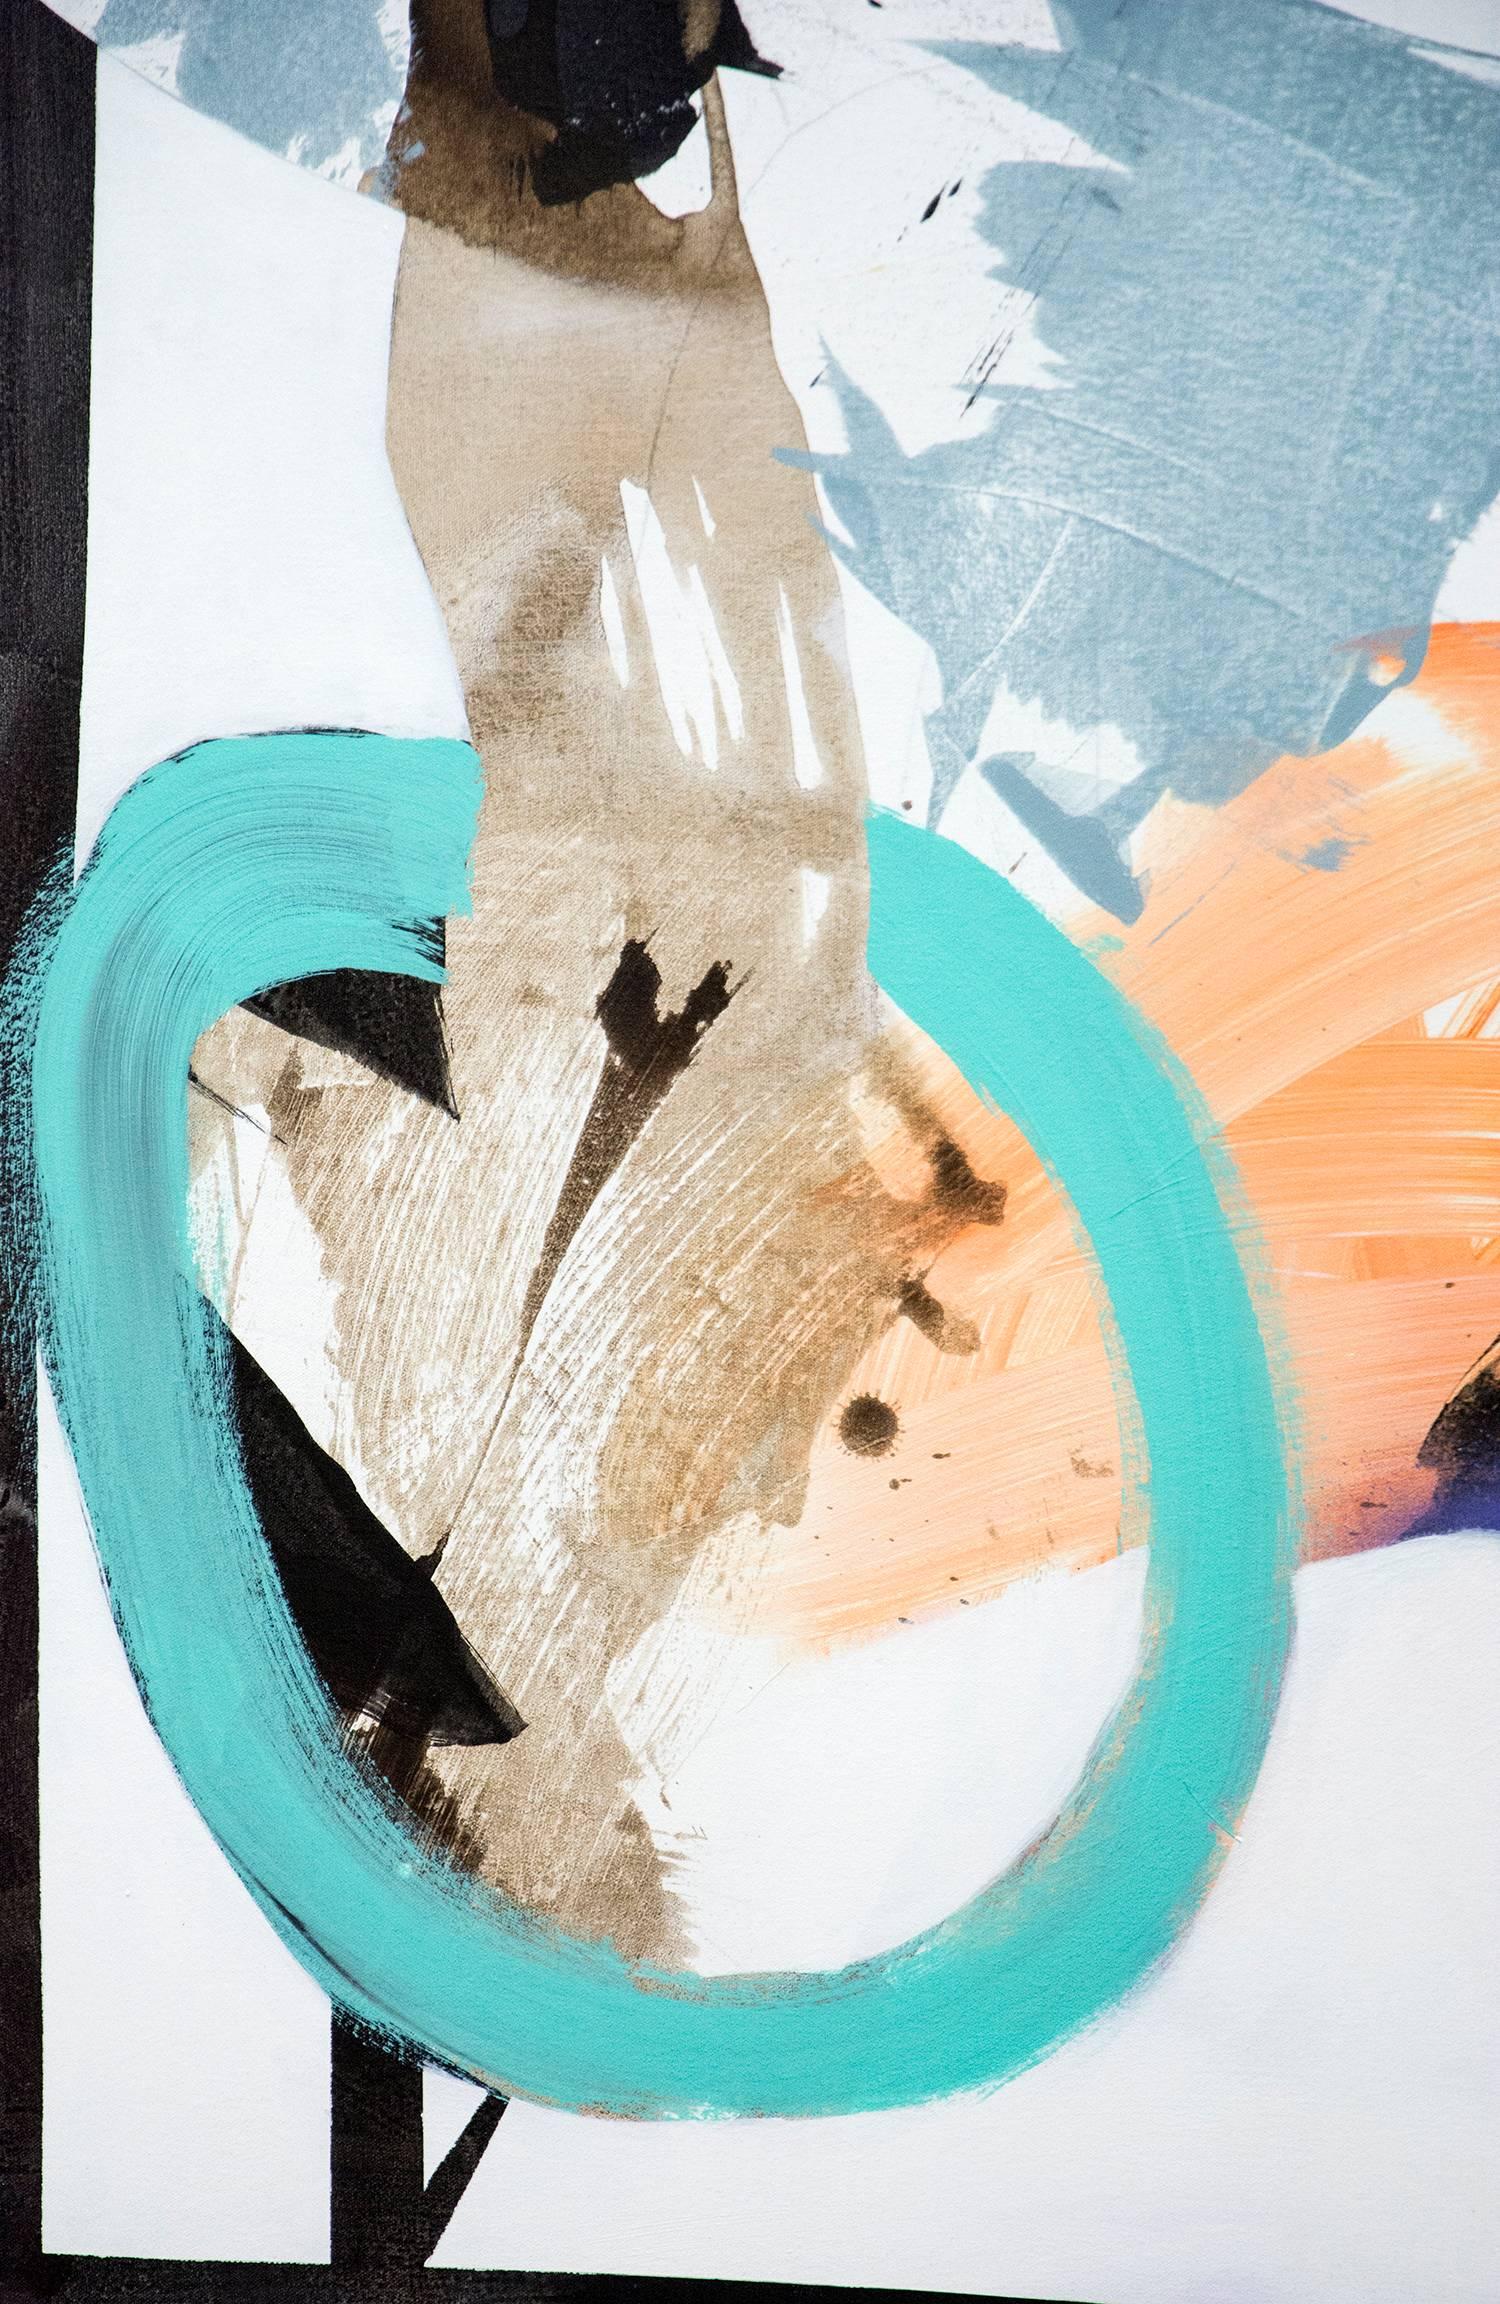 Out of the Woods - Botanicals & shapes in turquoise, orange, black and white - Abstract Painting by Fiona Ackerman